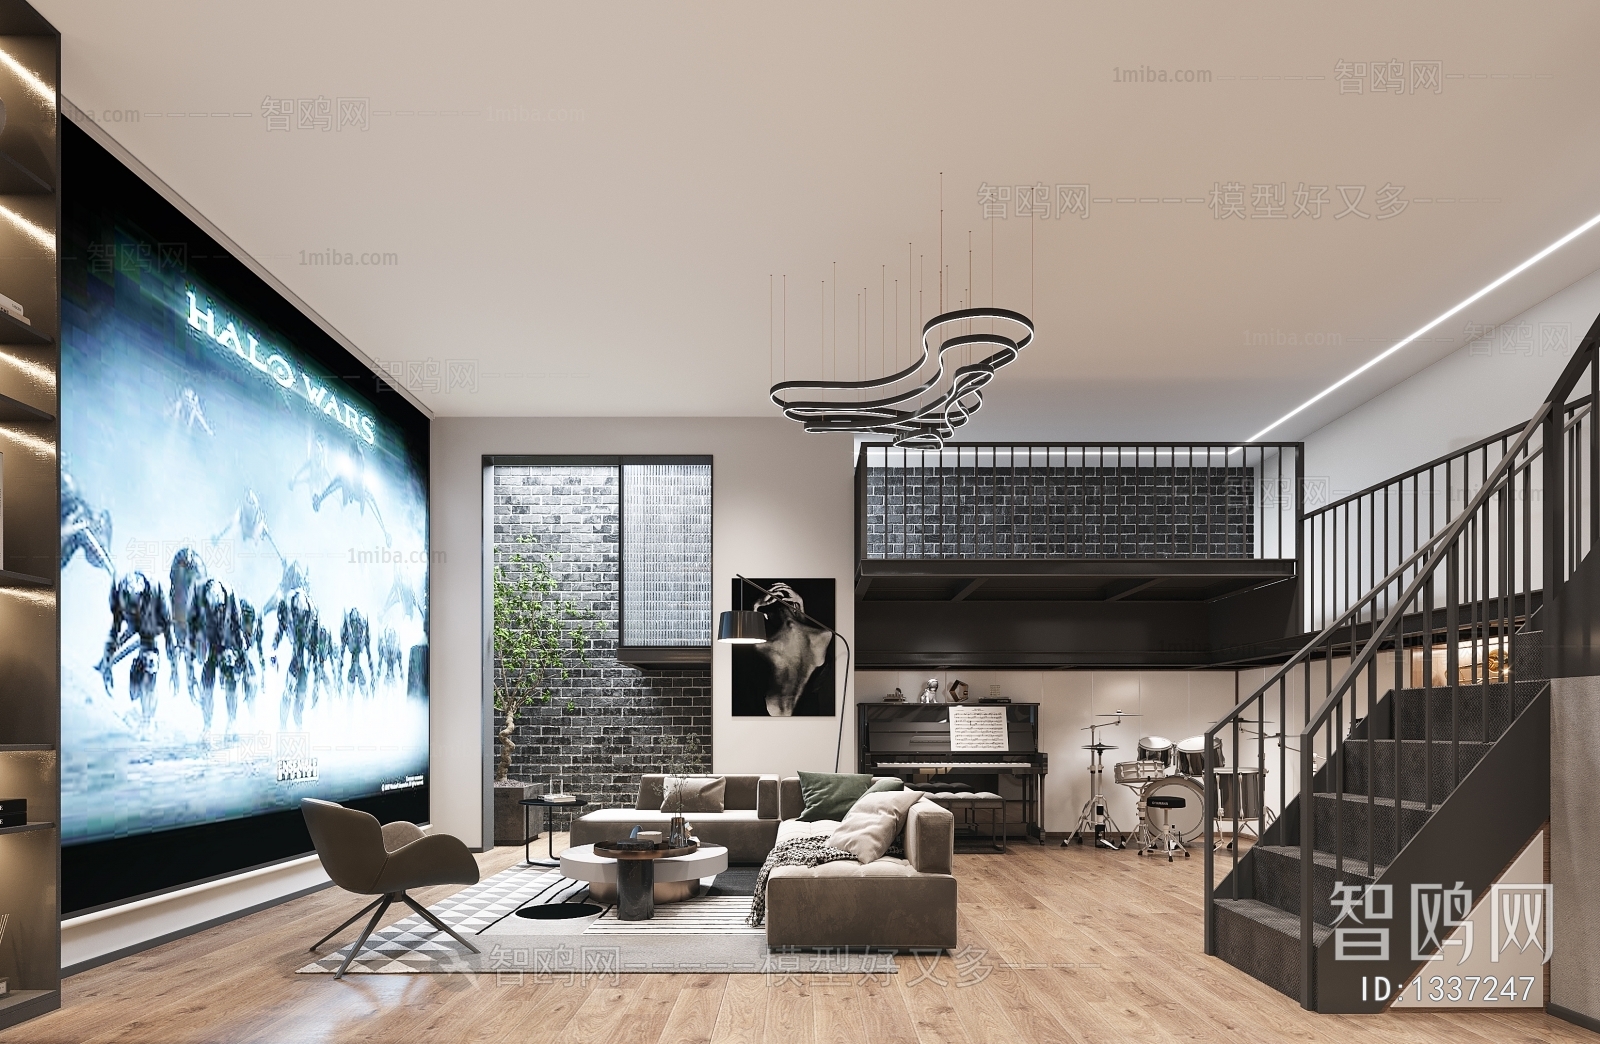 Modern Industrial Style A Living Room